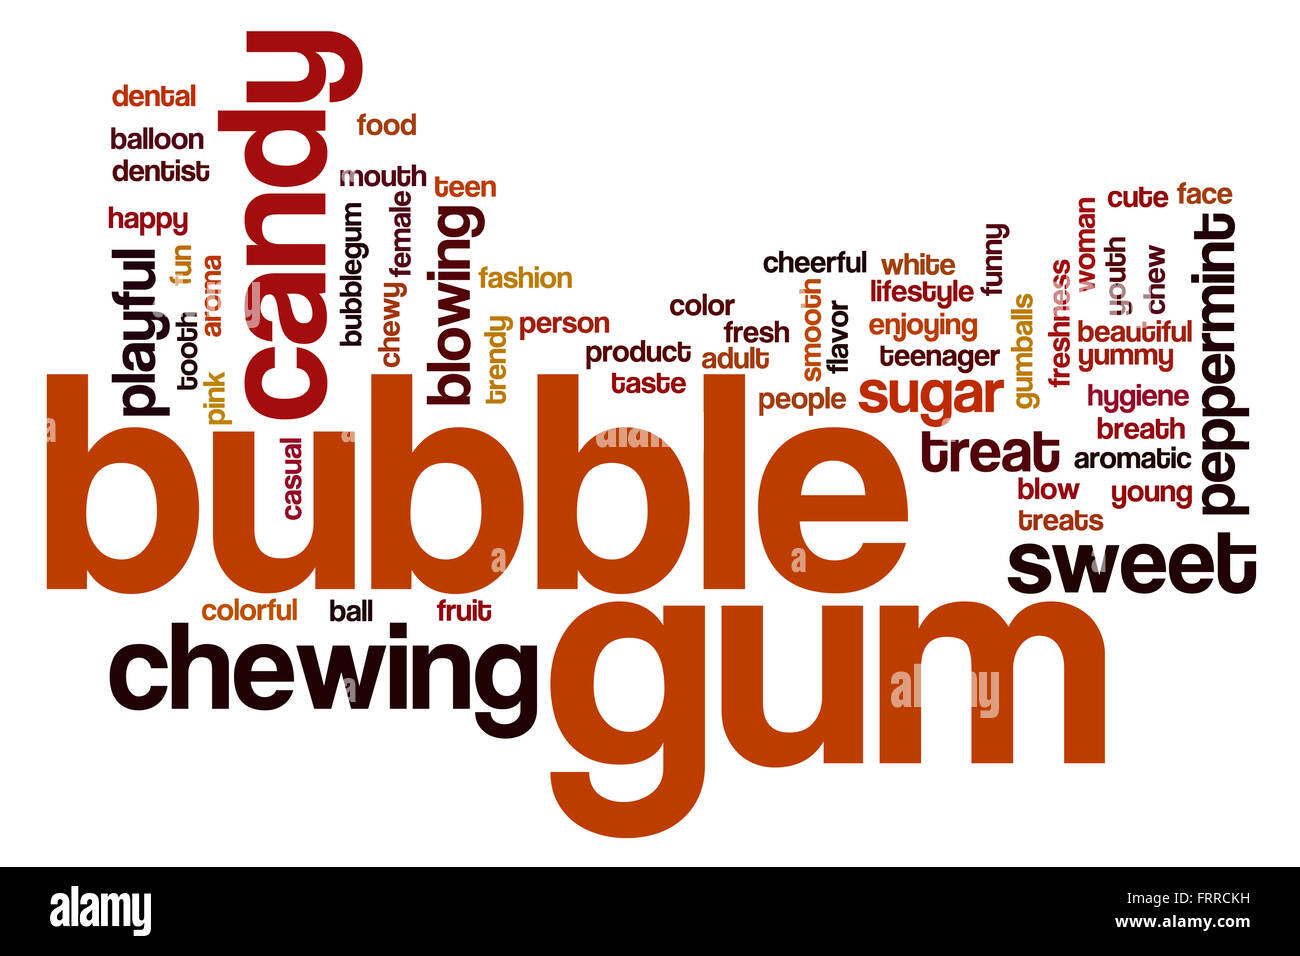 Bubble gum word cloud concept with candy chewing related tags Stock Photo